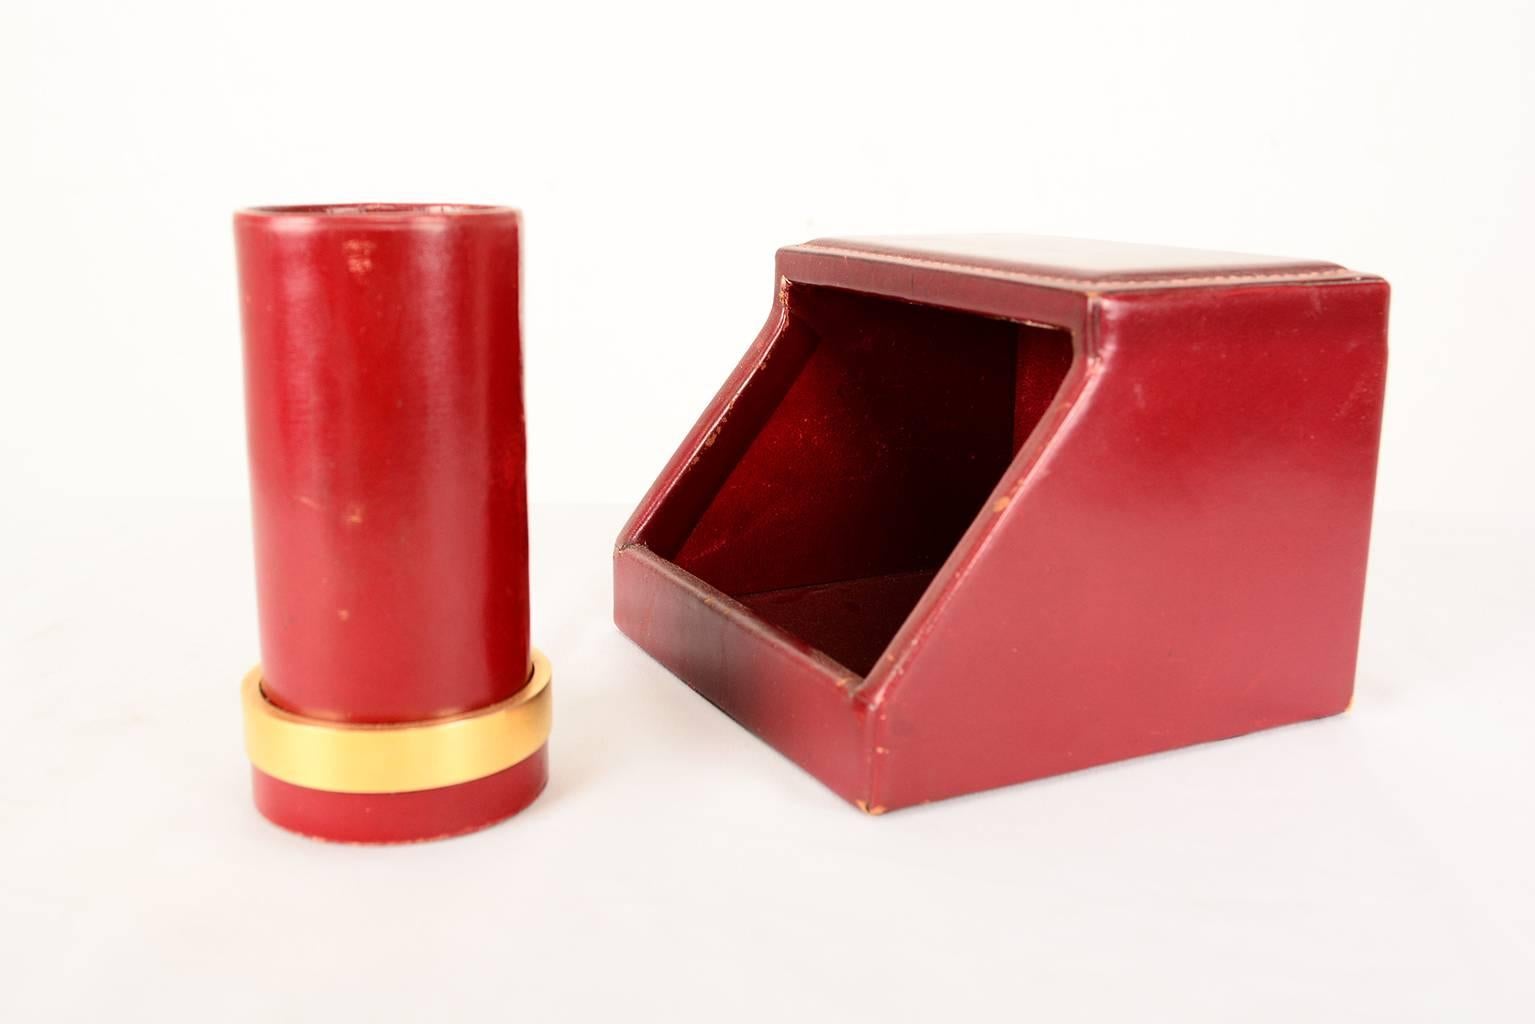 For your consideration a beautiful vintage desk set made by Hermes. 
Fine quality leather work with iconic precise stitching in burgundy leather. 

Note holder and pen holder. Both pieces stamped underneath.

Expect gentle vintage wear. 

Pen